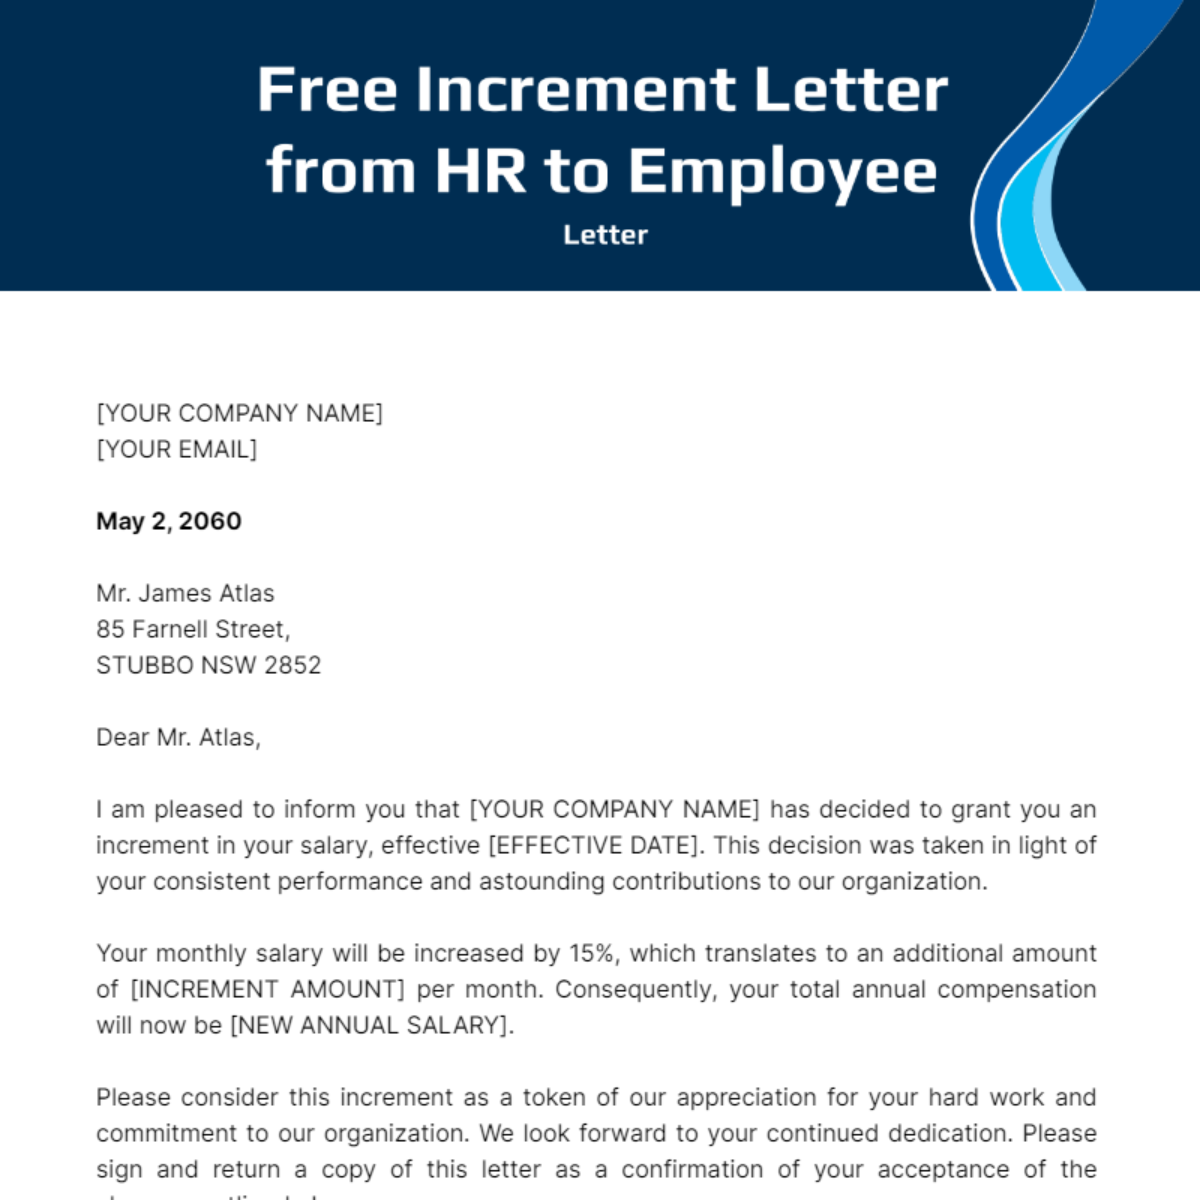 Increment Letter from HR to Employee Template